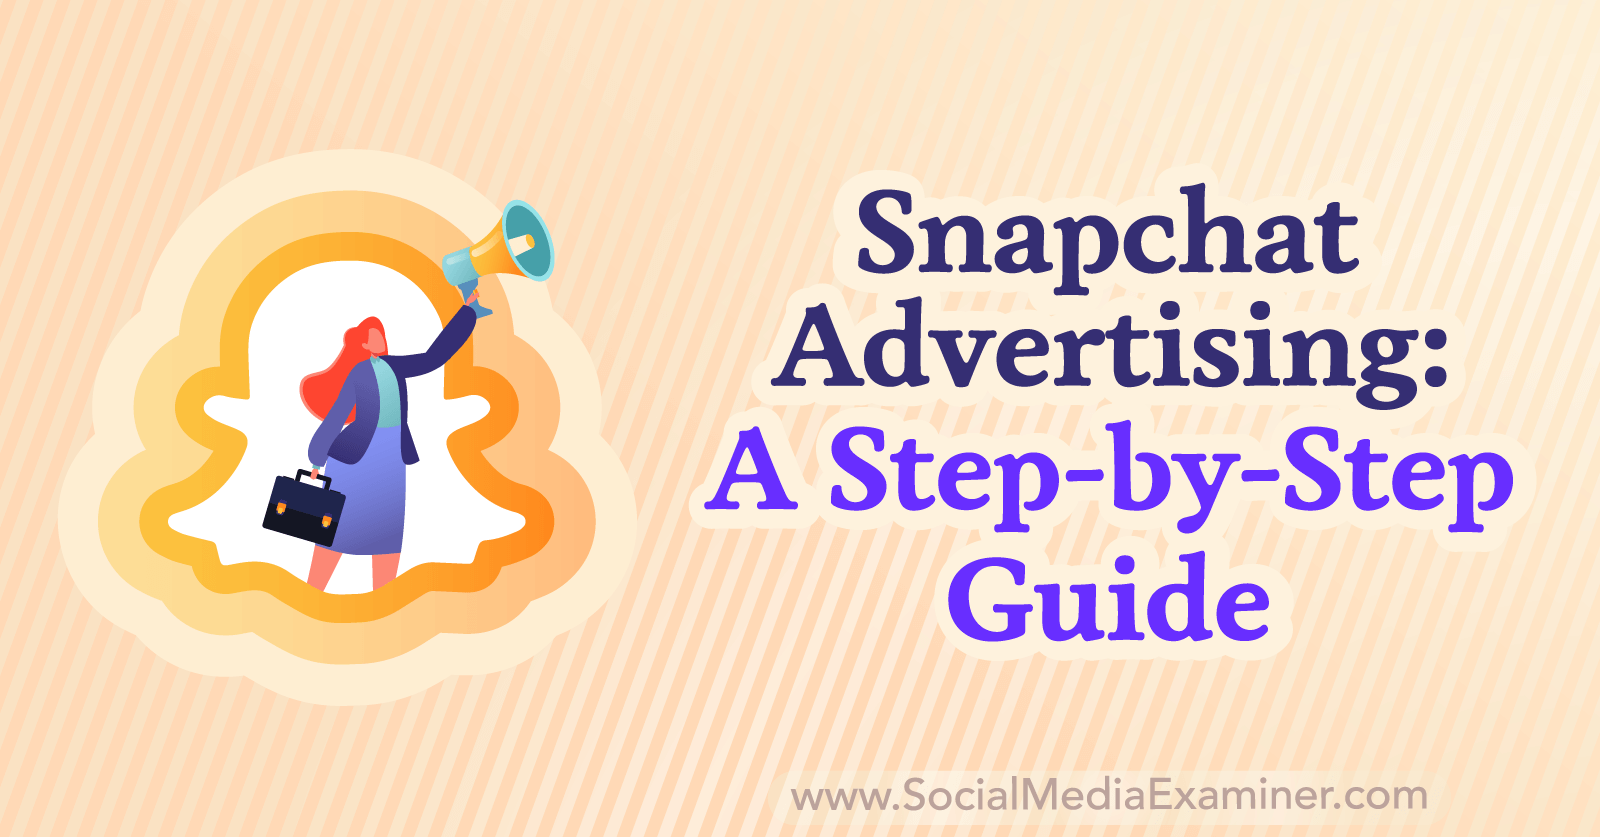 Snapchat Advertising: A Step-by-Step Guide by Anna Sonnenberg on Social Media Examiner.